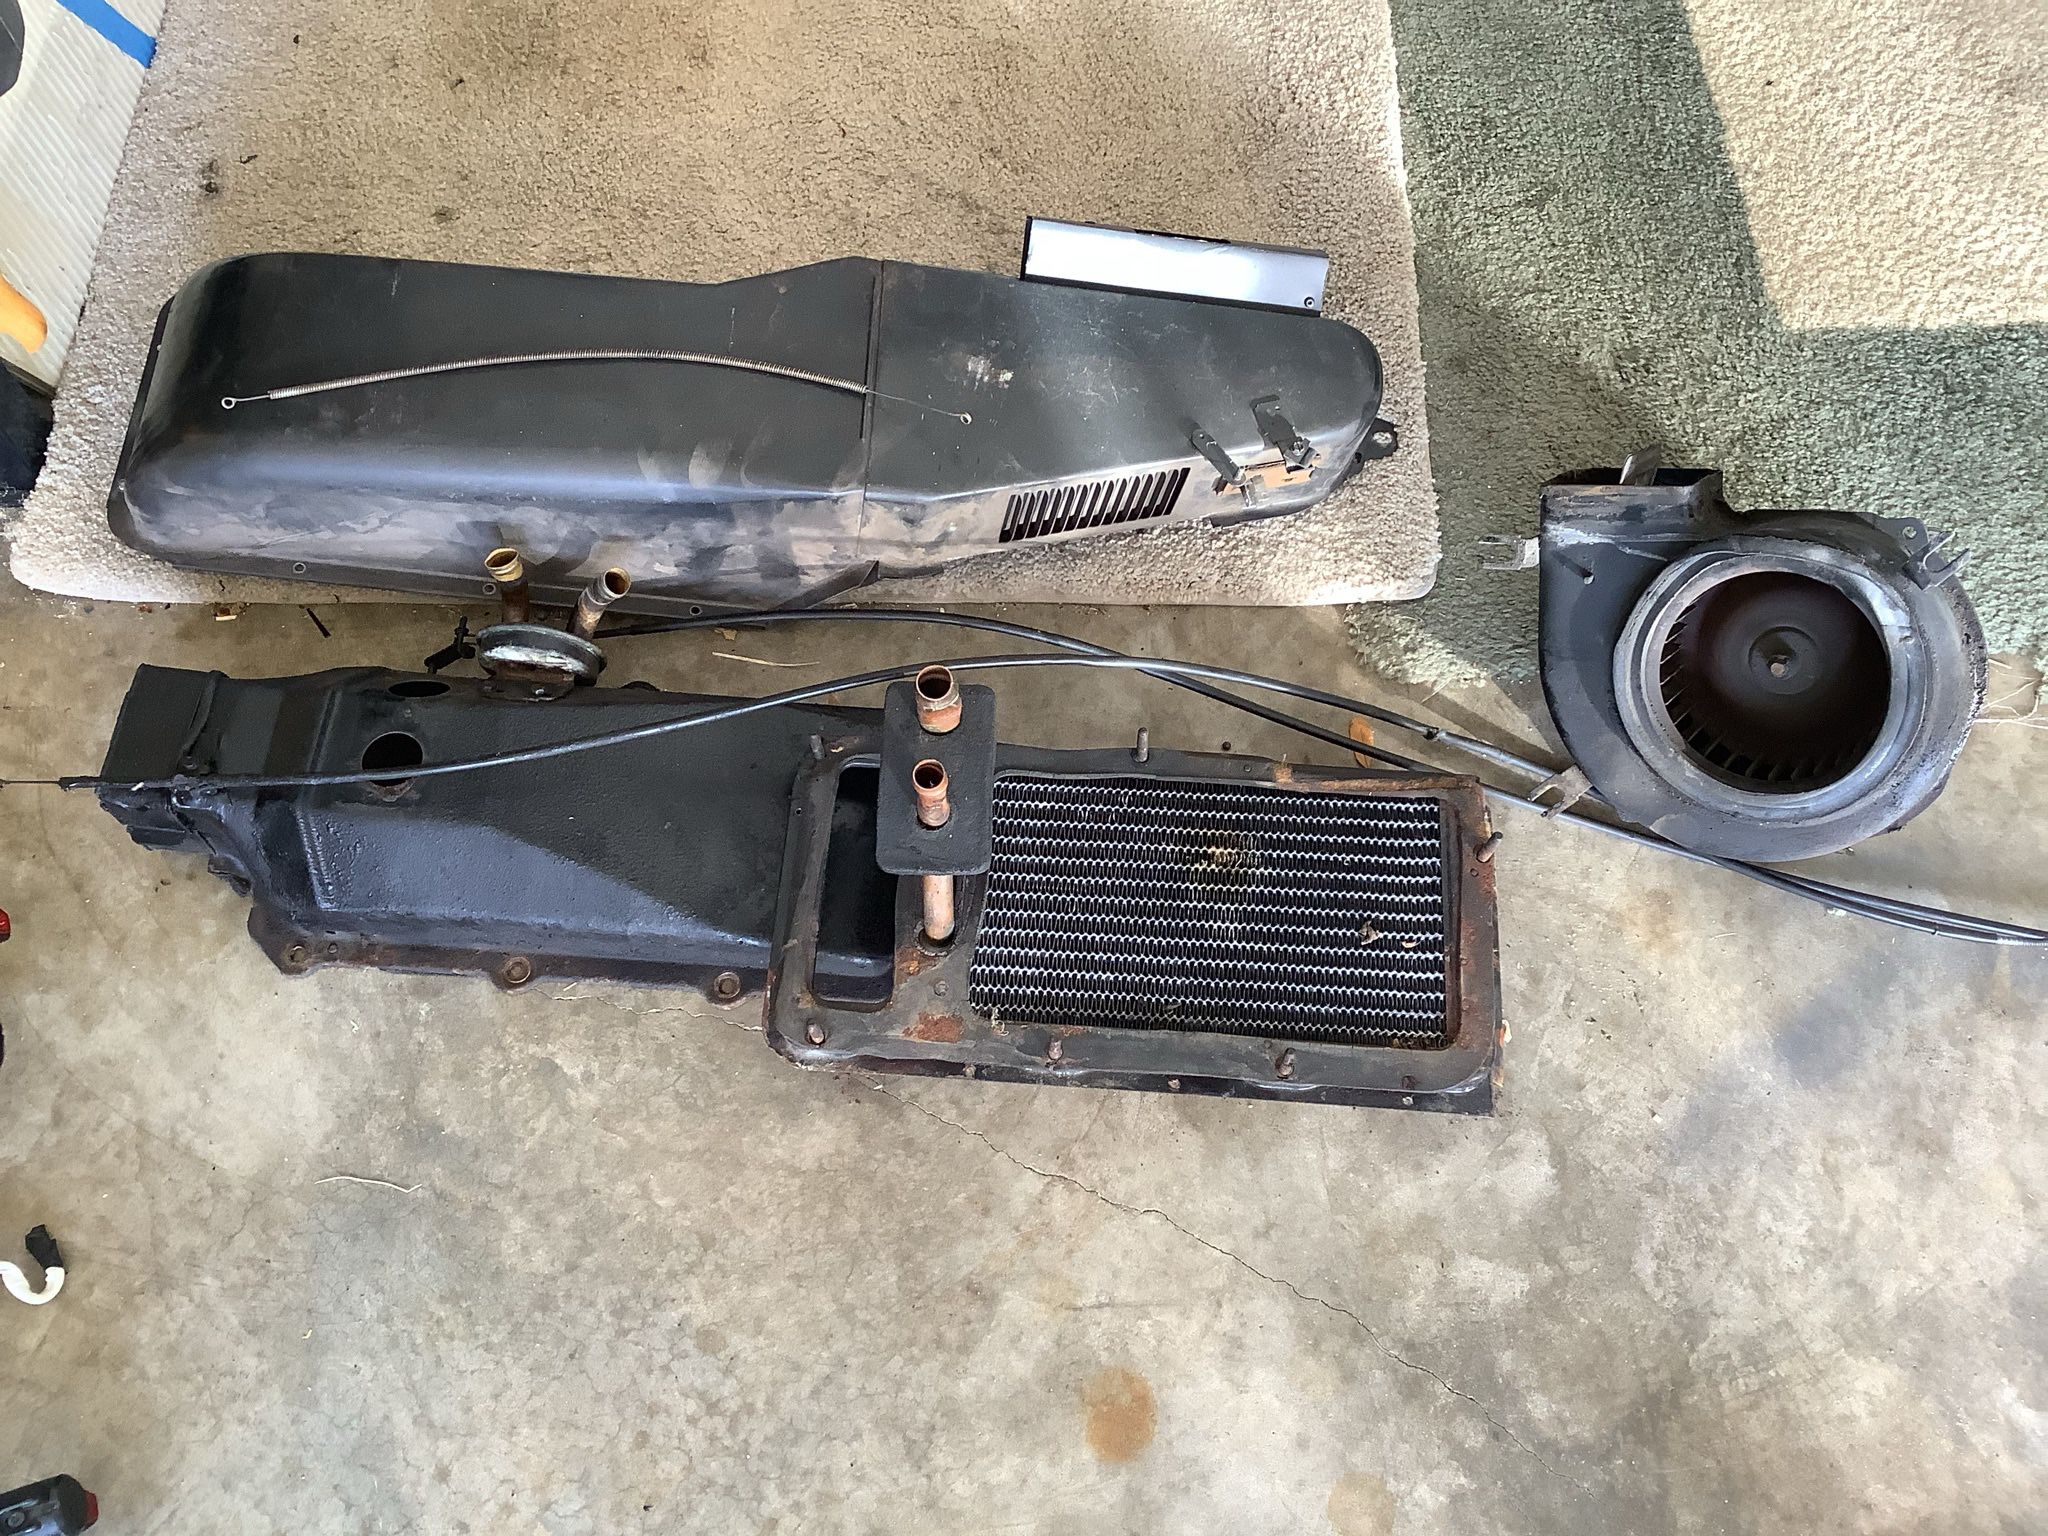 Heater For A 1961-2 Chevy Impala Complete 